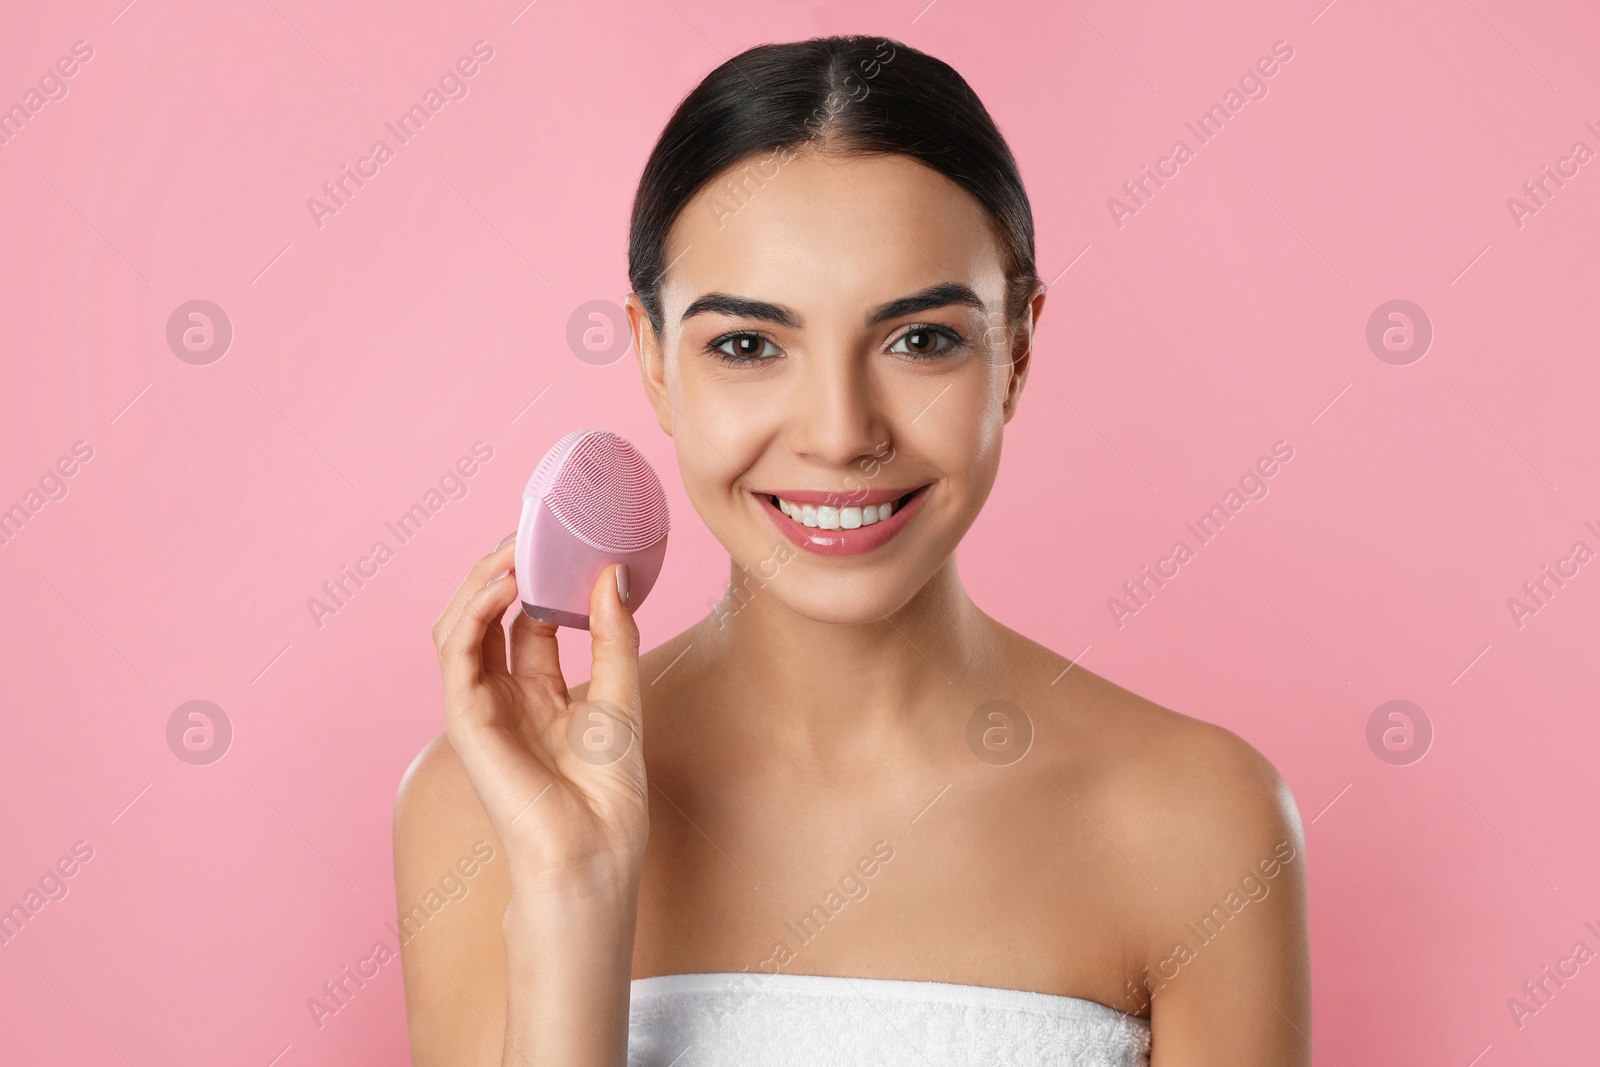 Photo of Young woman holding facial cleansing brush on pink background. Washing accessory